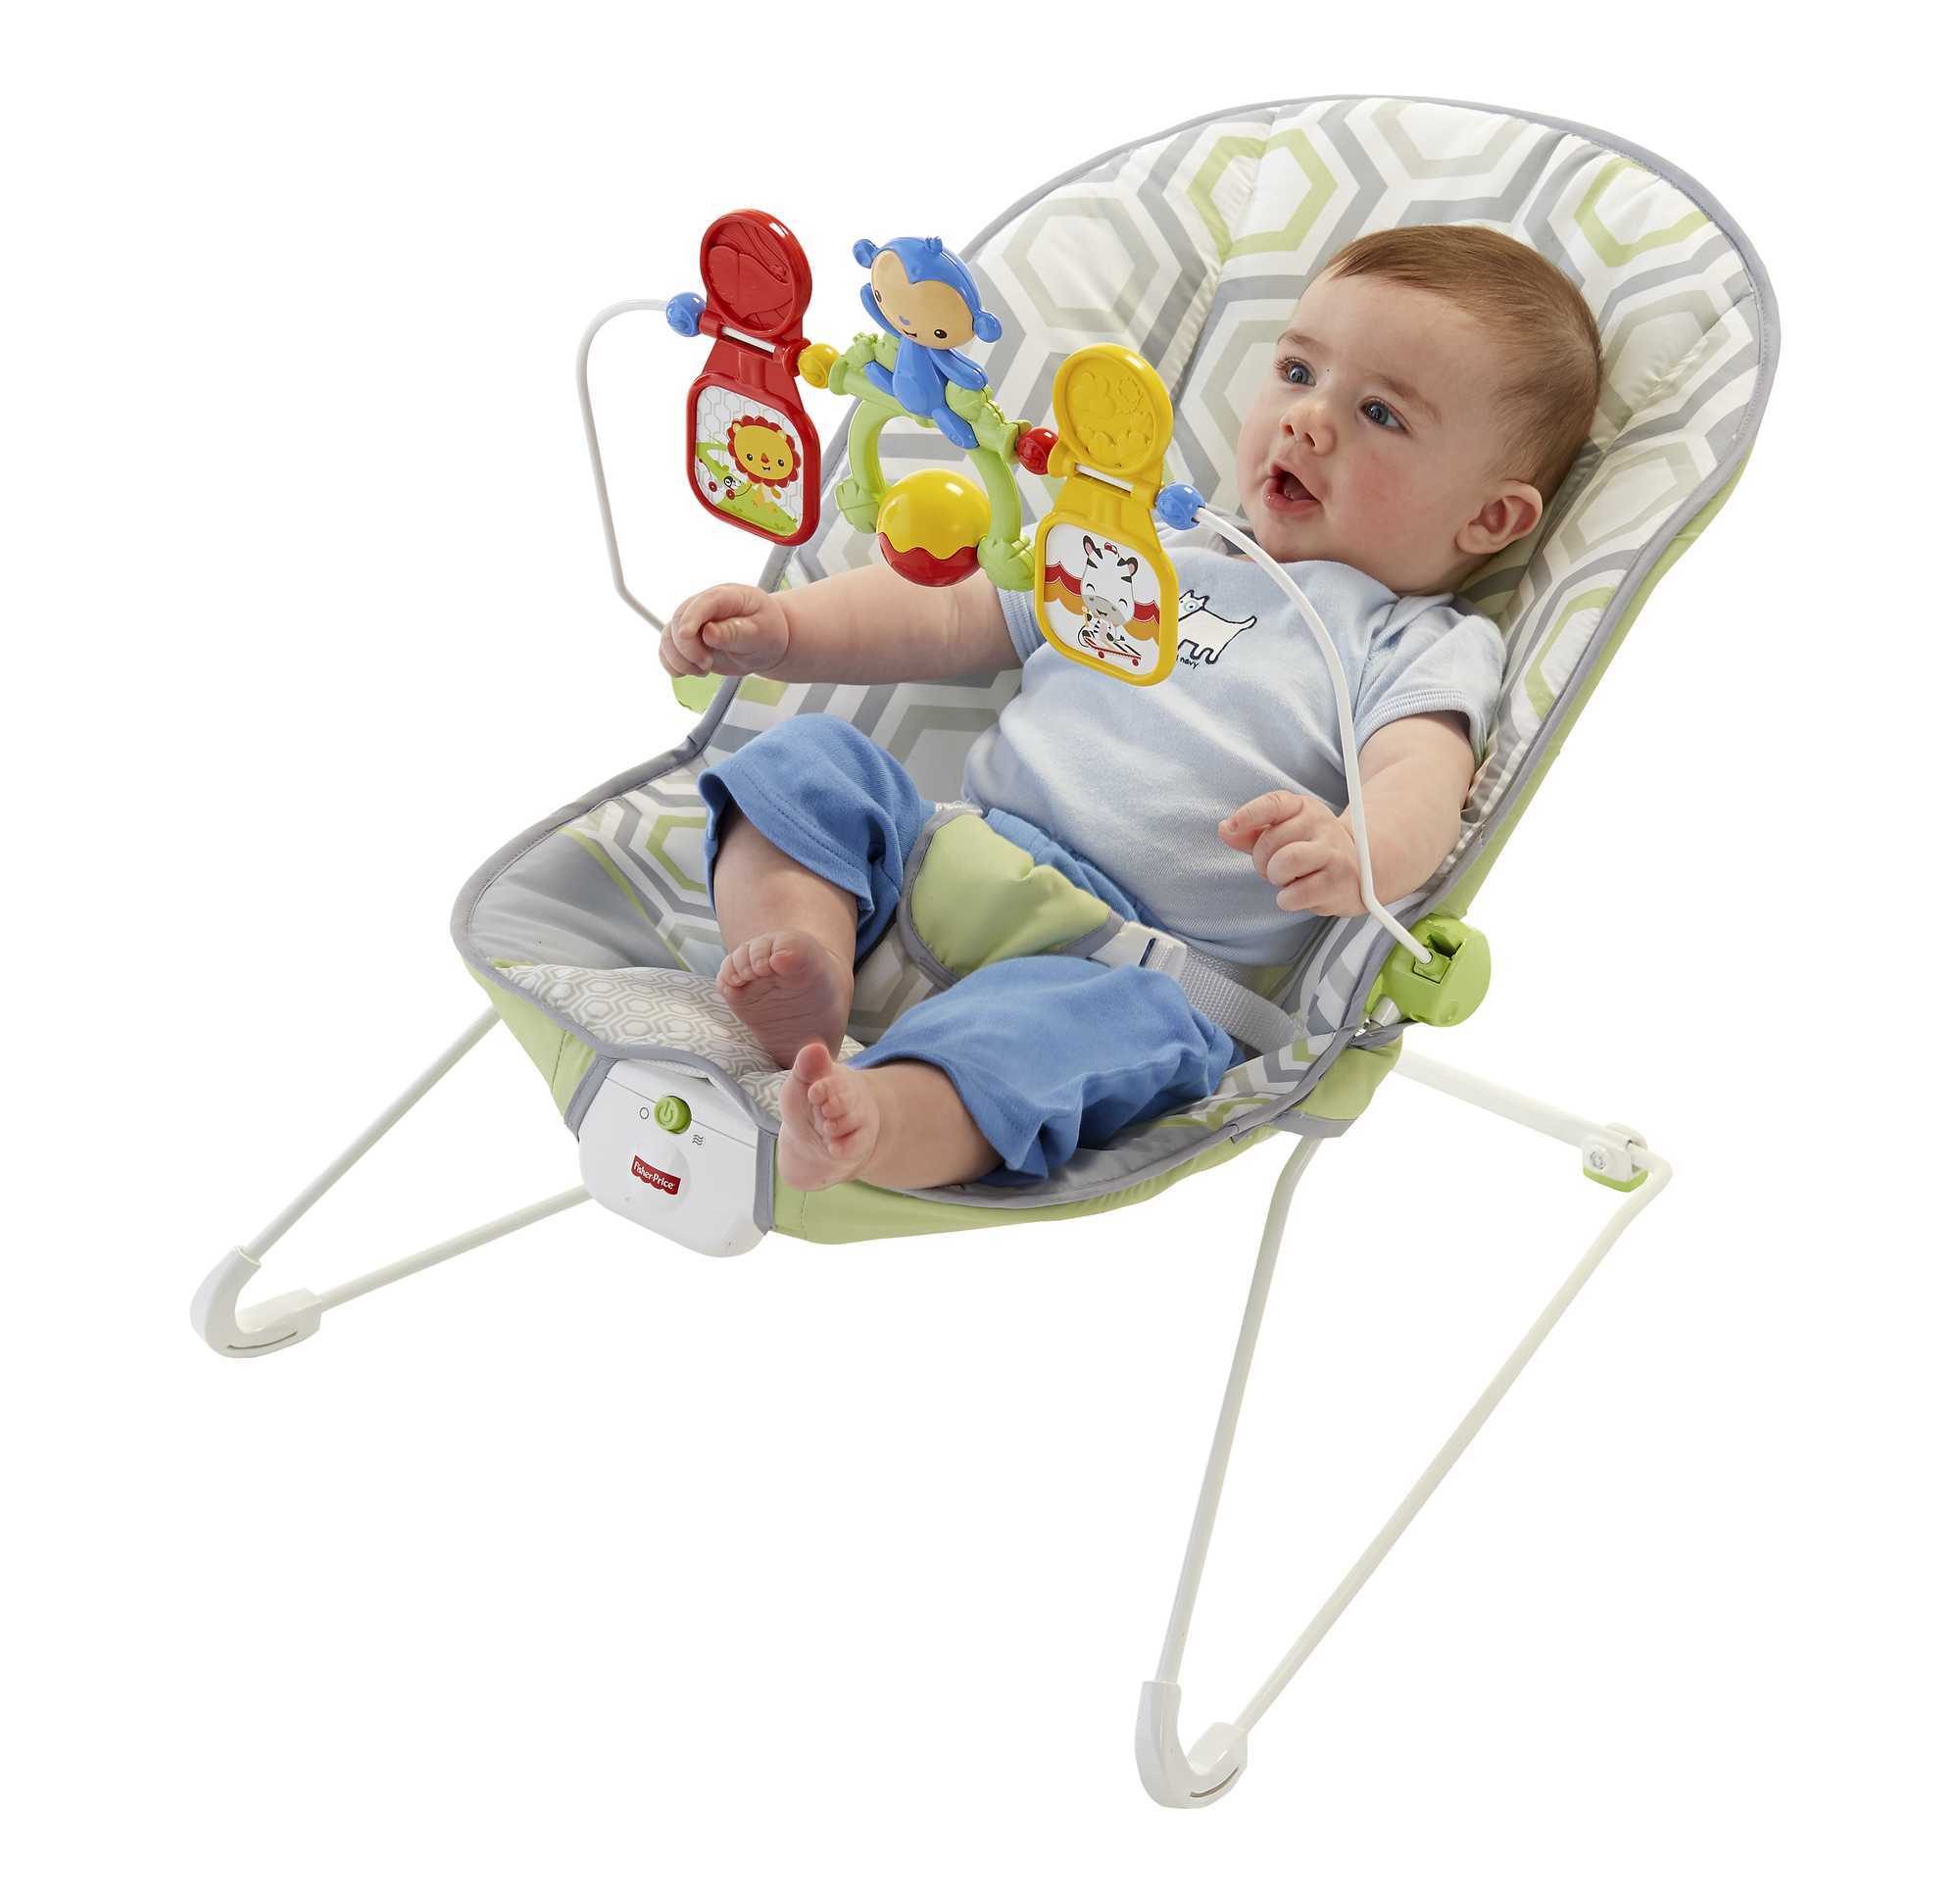 Fisher-Price Baby's Bouncer for Infants Birth+, Geo Meadow - image 4 of 6